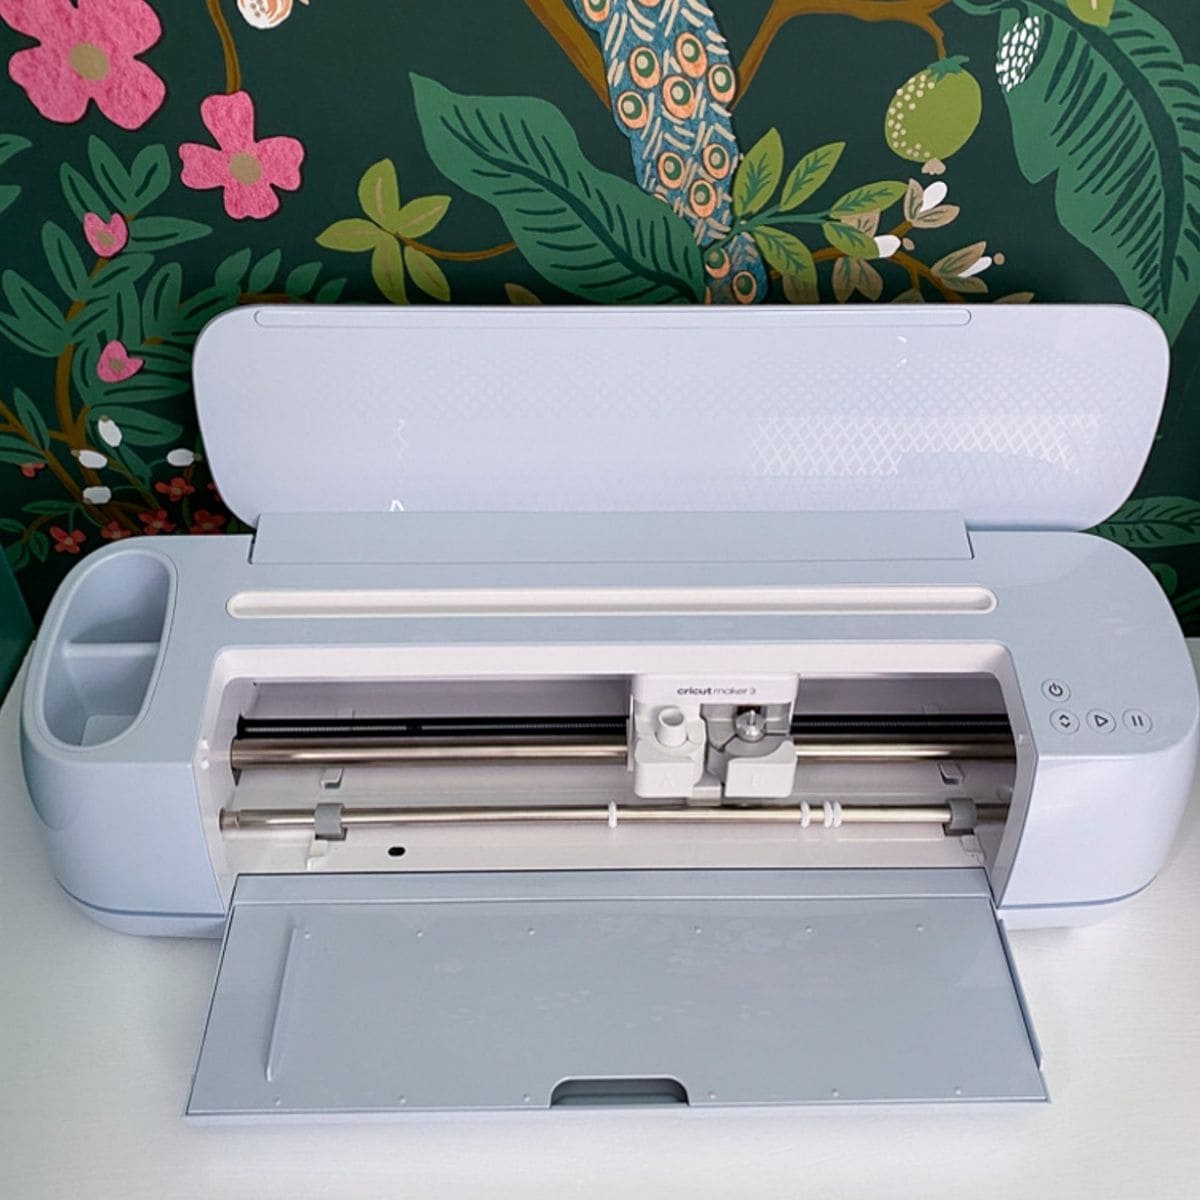 cricut maker in front of green floral wallpaper